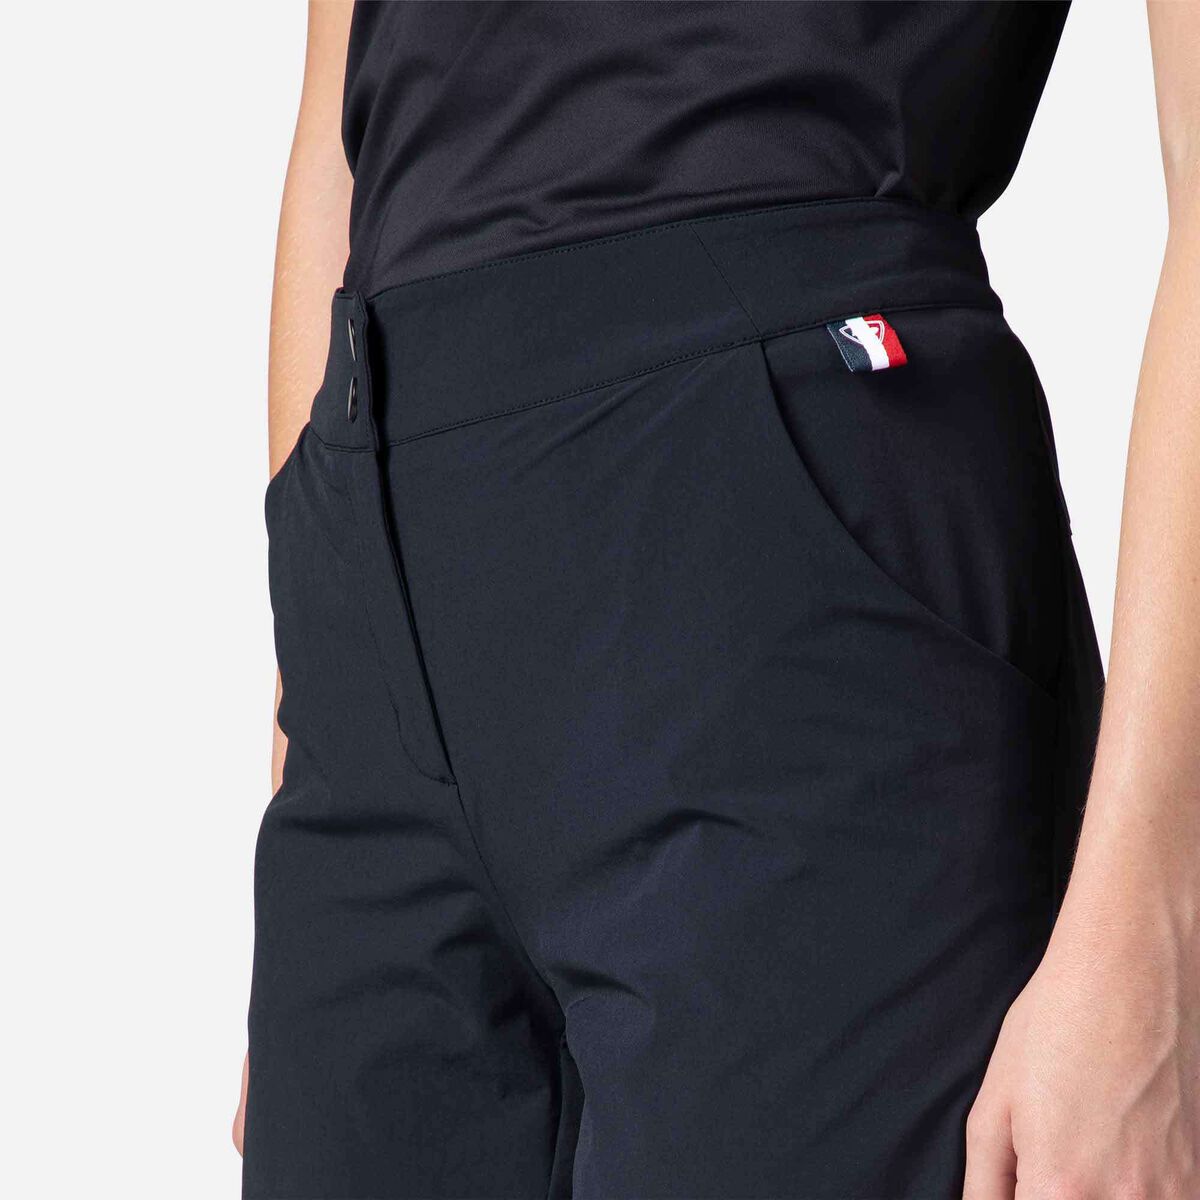 Women's lightweight breathable shorts